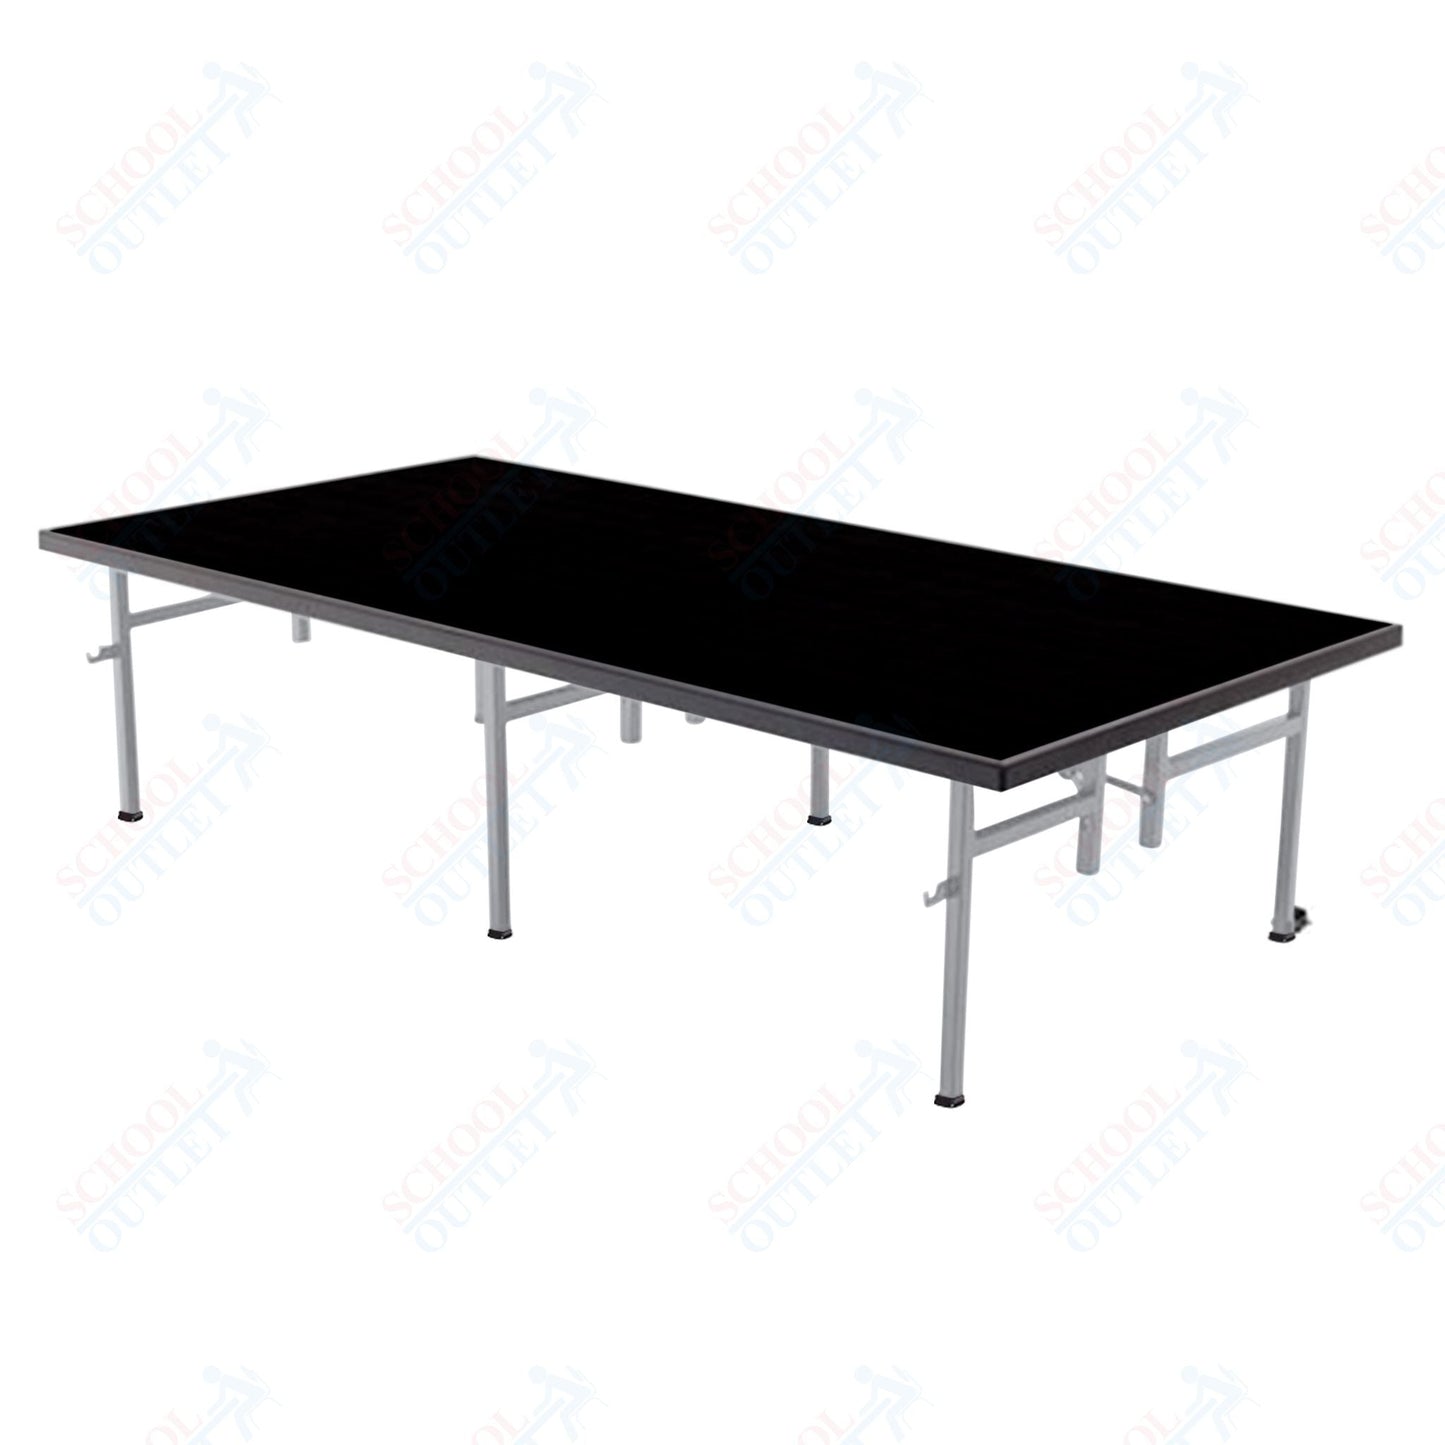 AmTab Fixed Height Stage - Polypropylene Top - 48"W x 96"L x 16"H (AmTab AMT - ST4816P) - SchoolOutlet